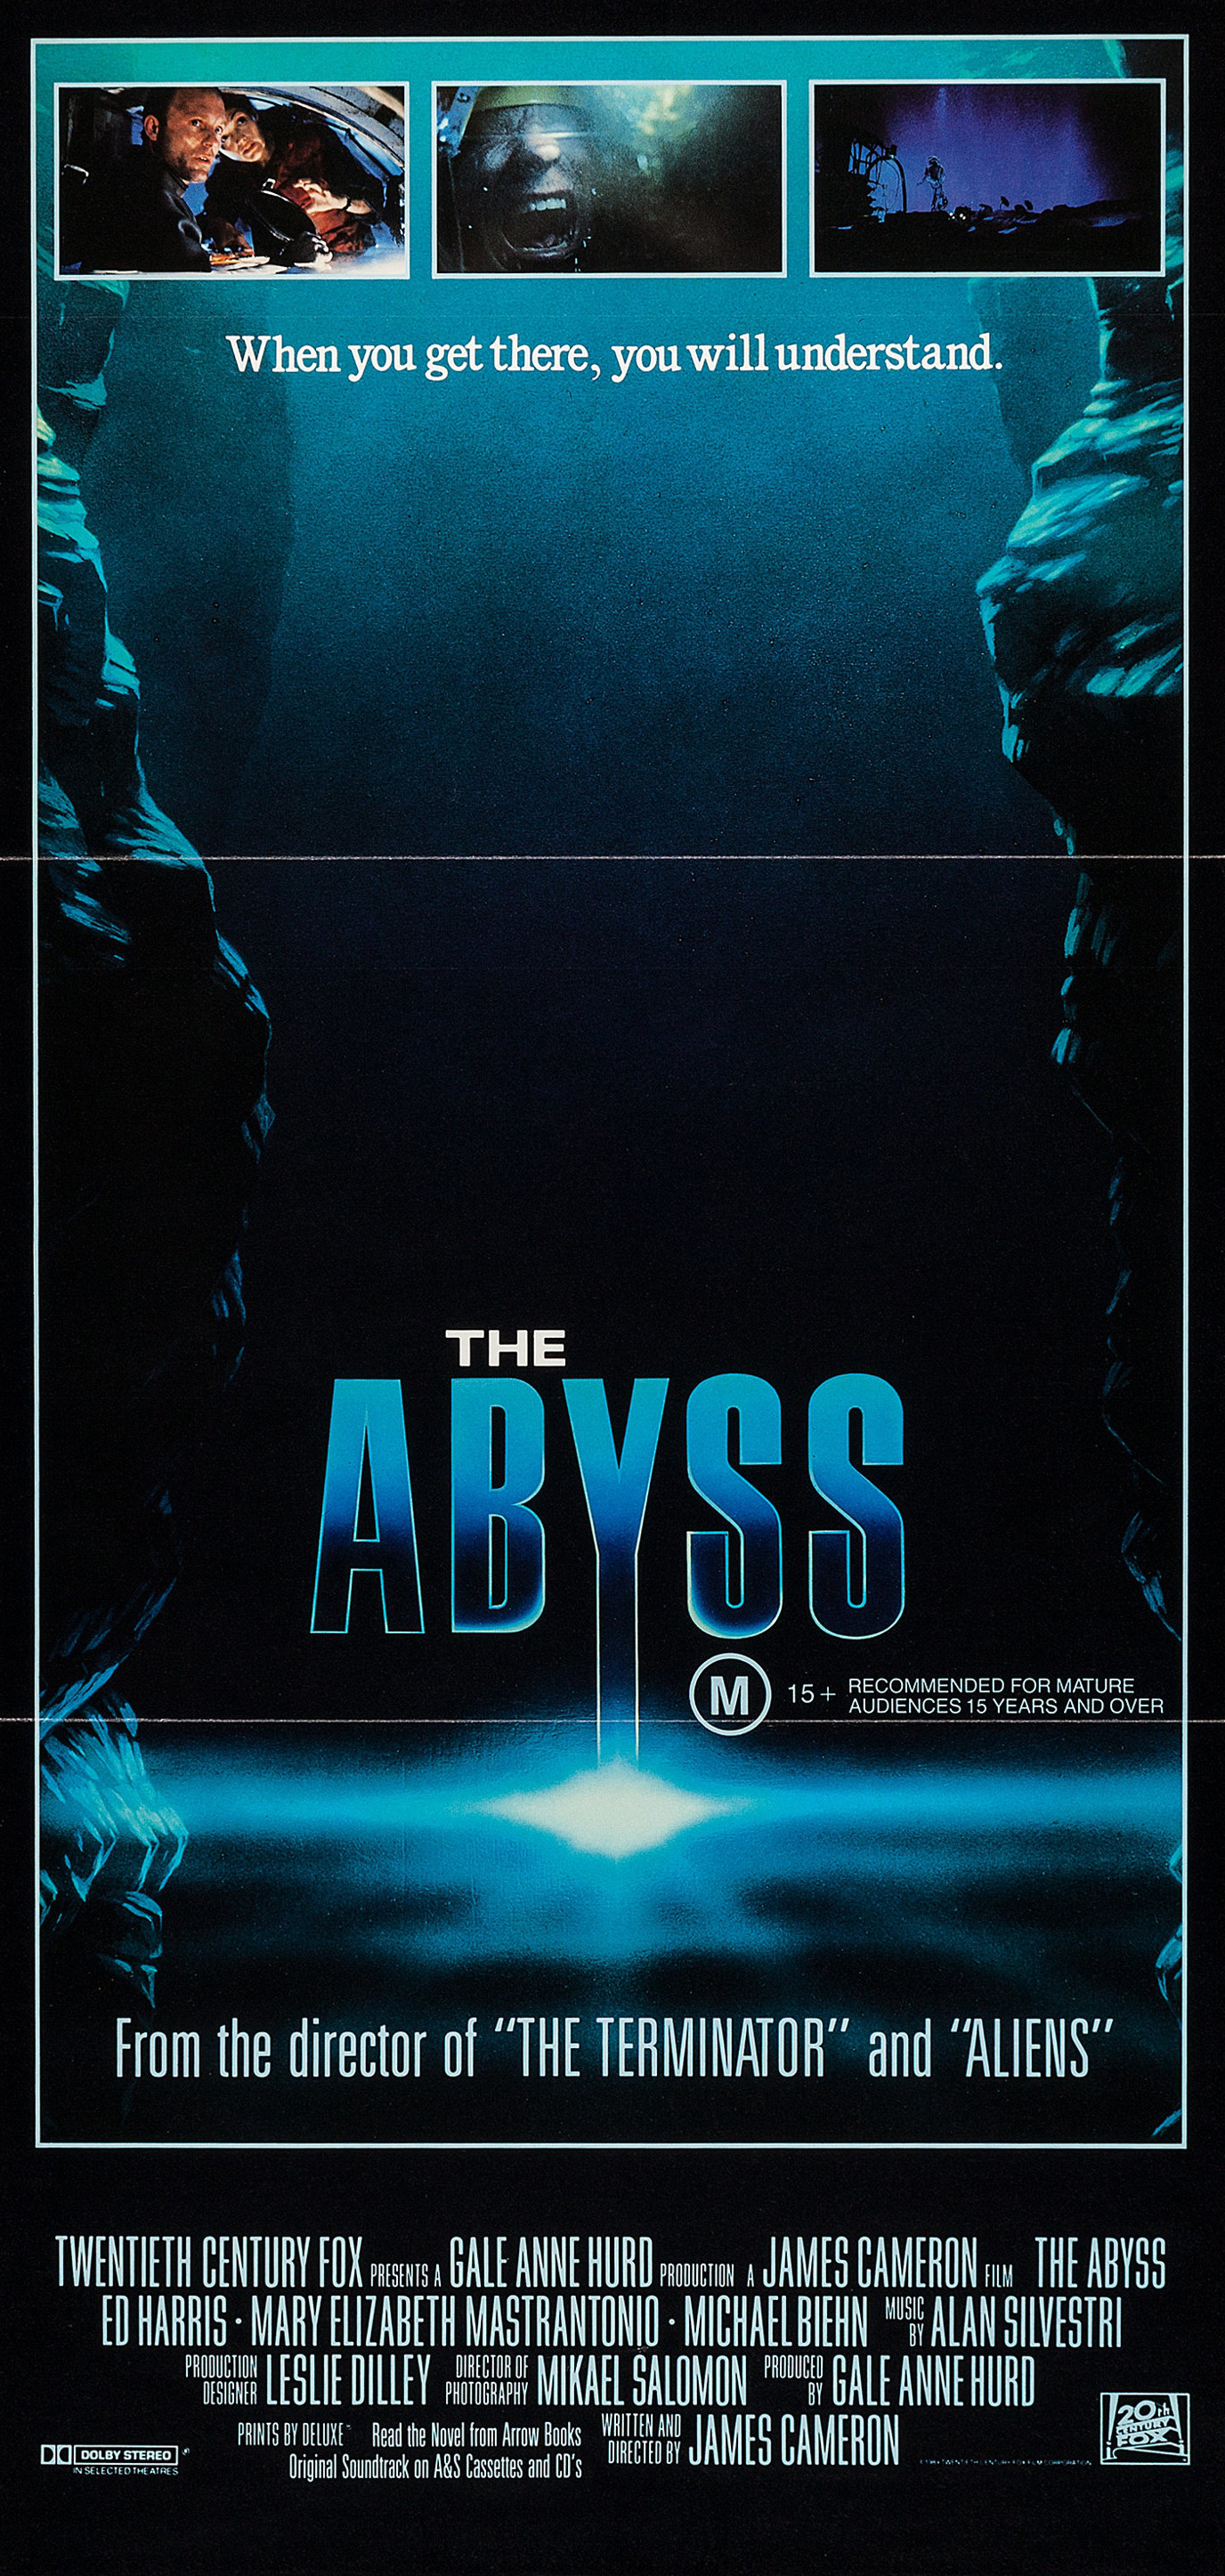 Return to Abyss instal the last version for apple